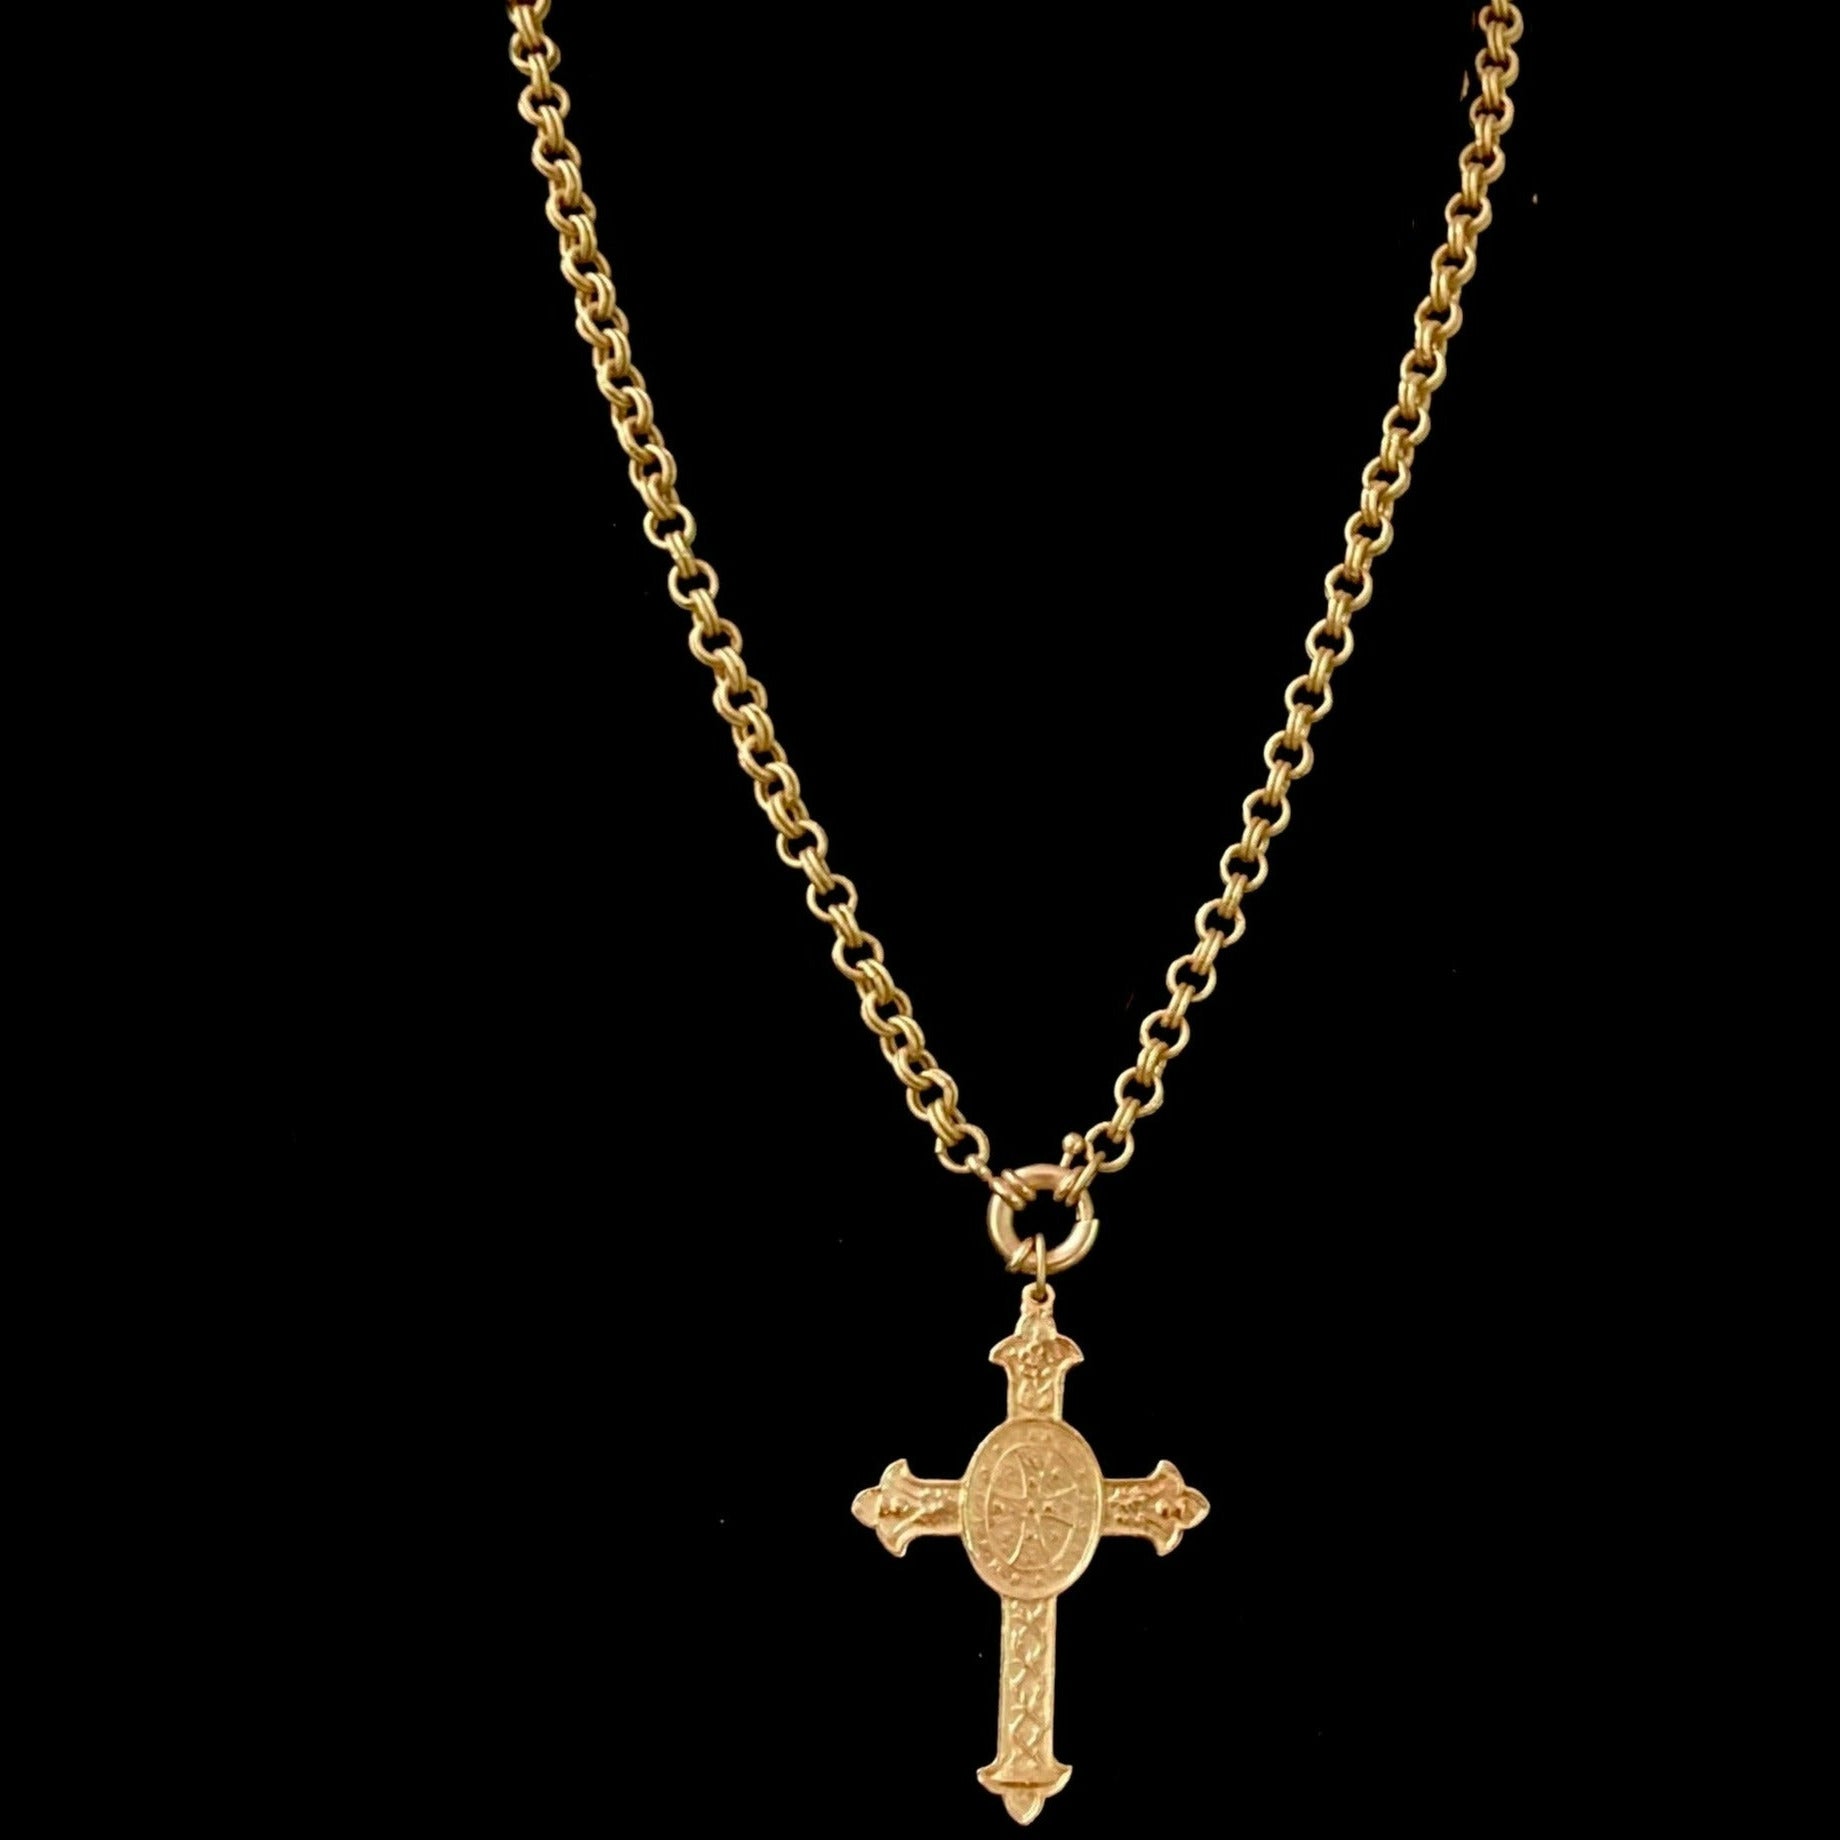 Cross of San Benito Medieval Chain  Necklace by Whispering Goddess - Gold